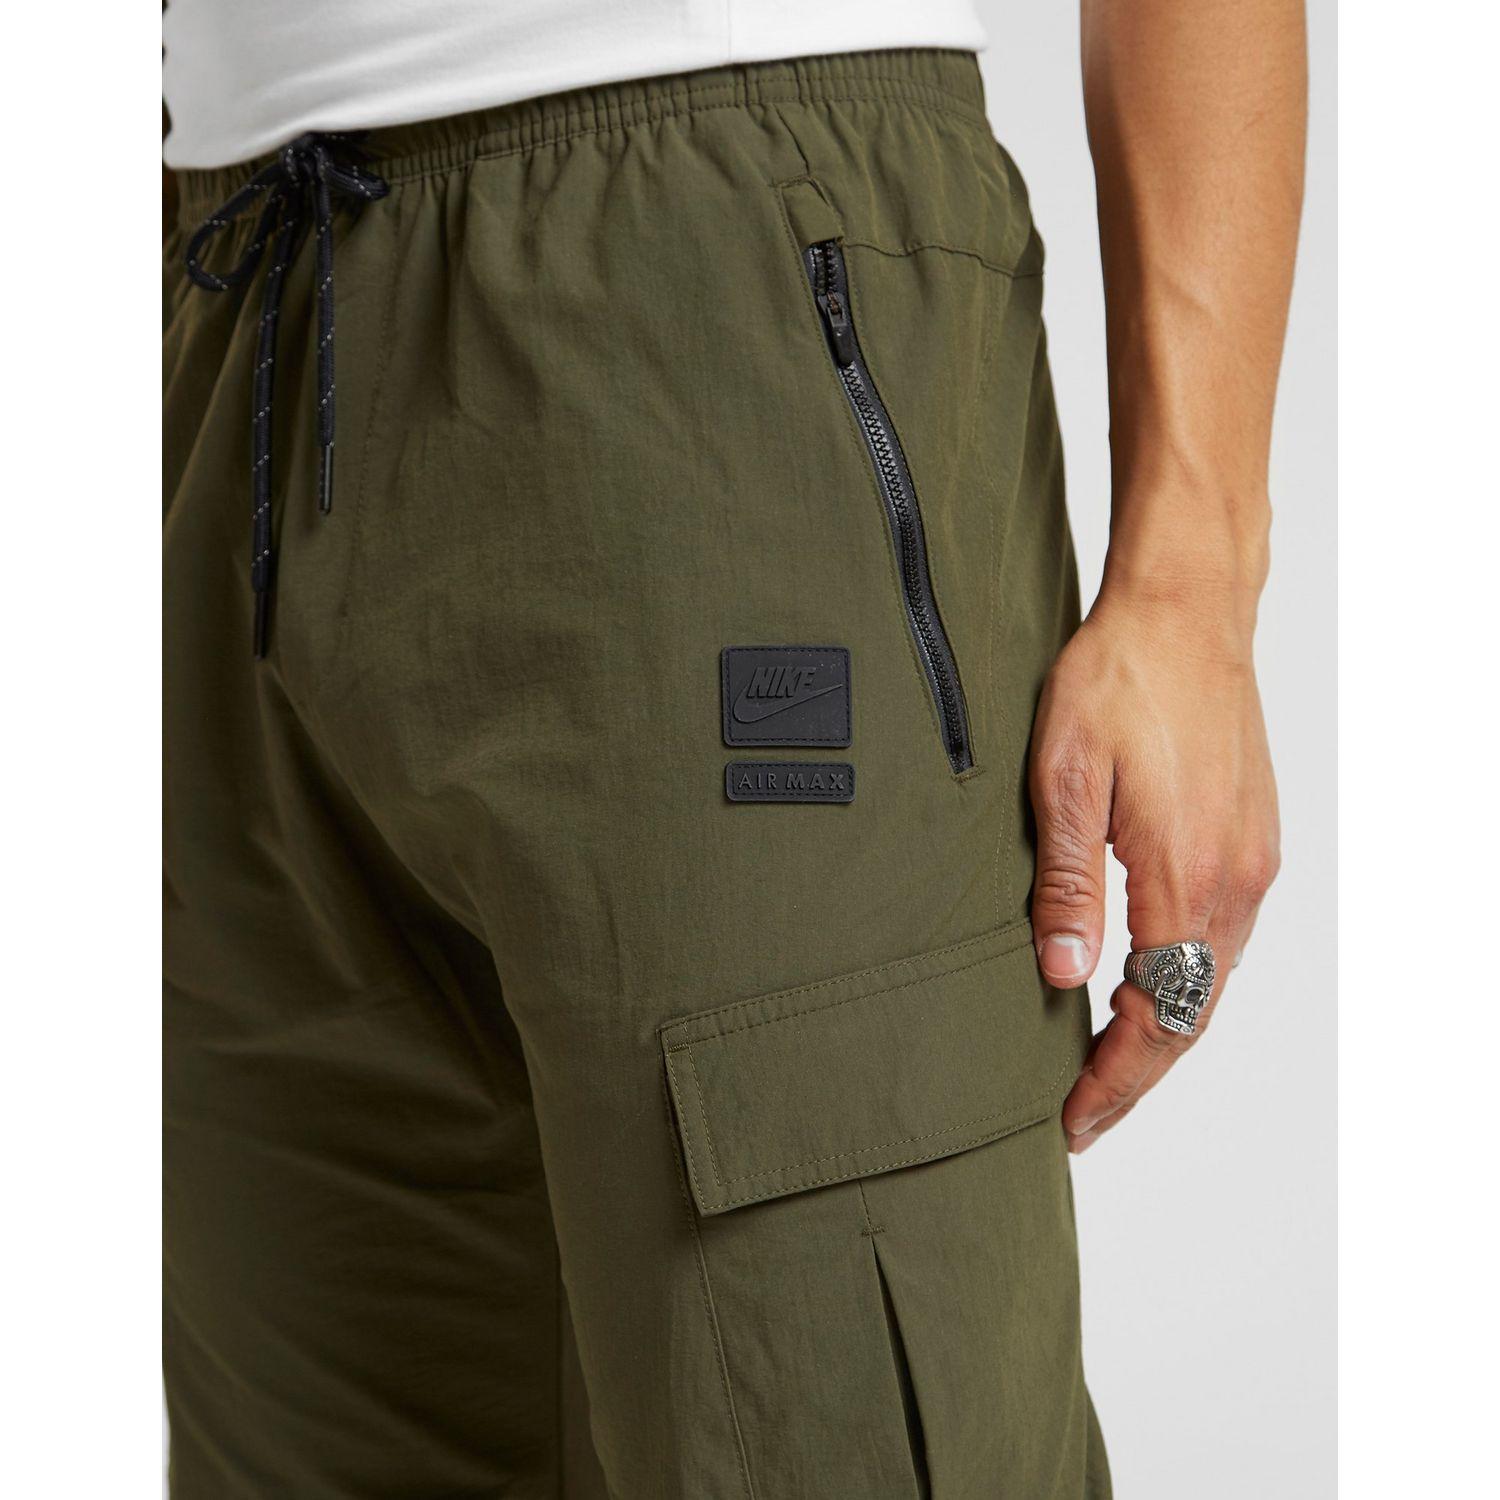 Nike Cotton Air Max Cargo Track Pants in Green for Men - Lyst